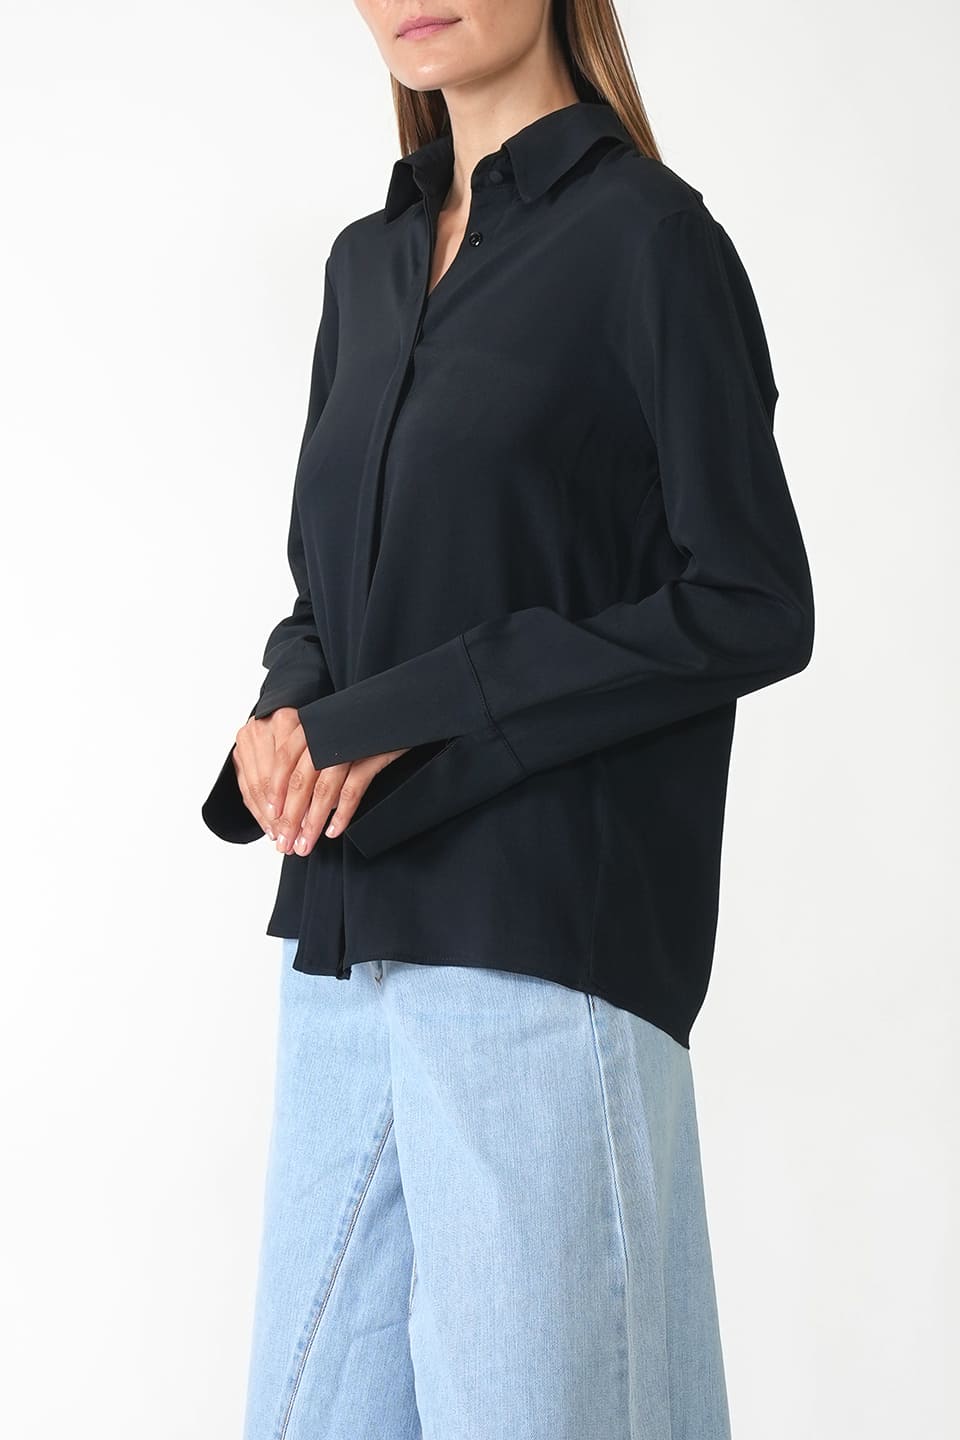 Designer Black Women long sleeve, shop online with free delivery in UAE. Product gallery 2